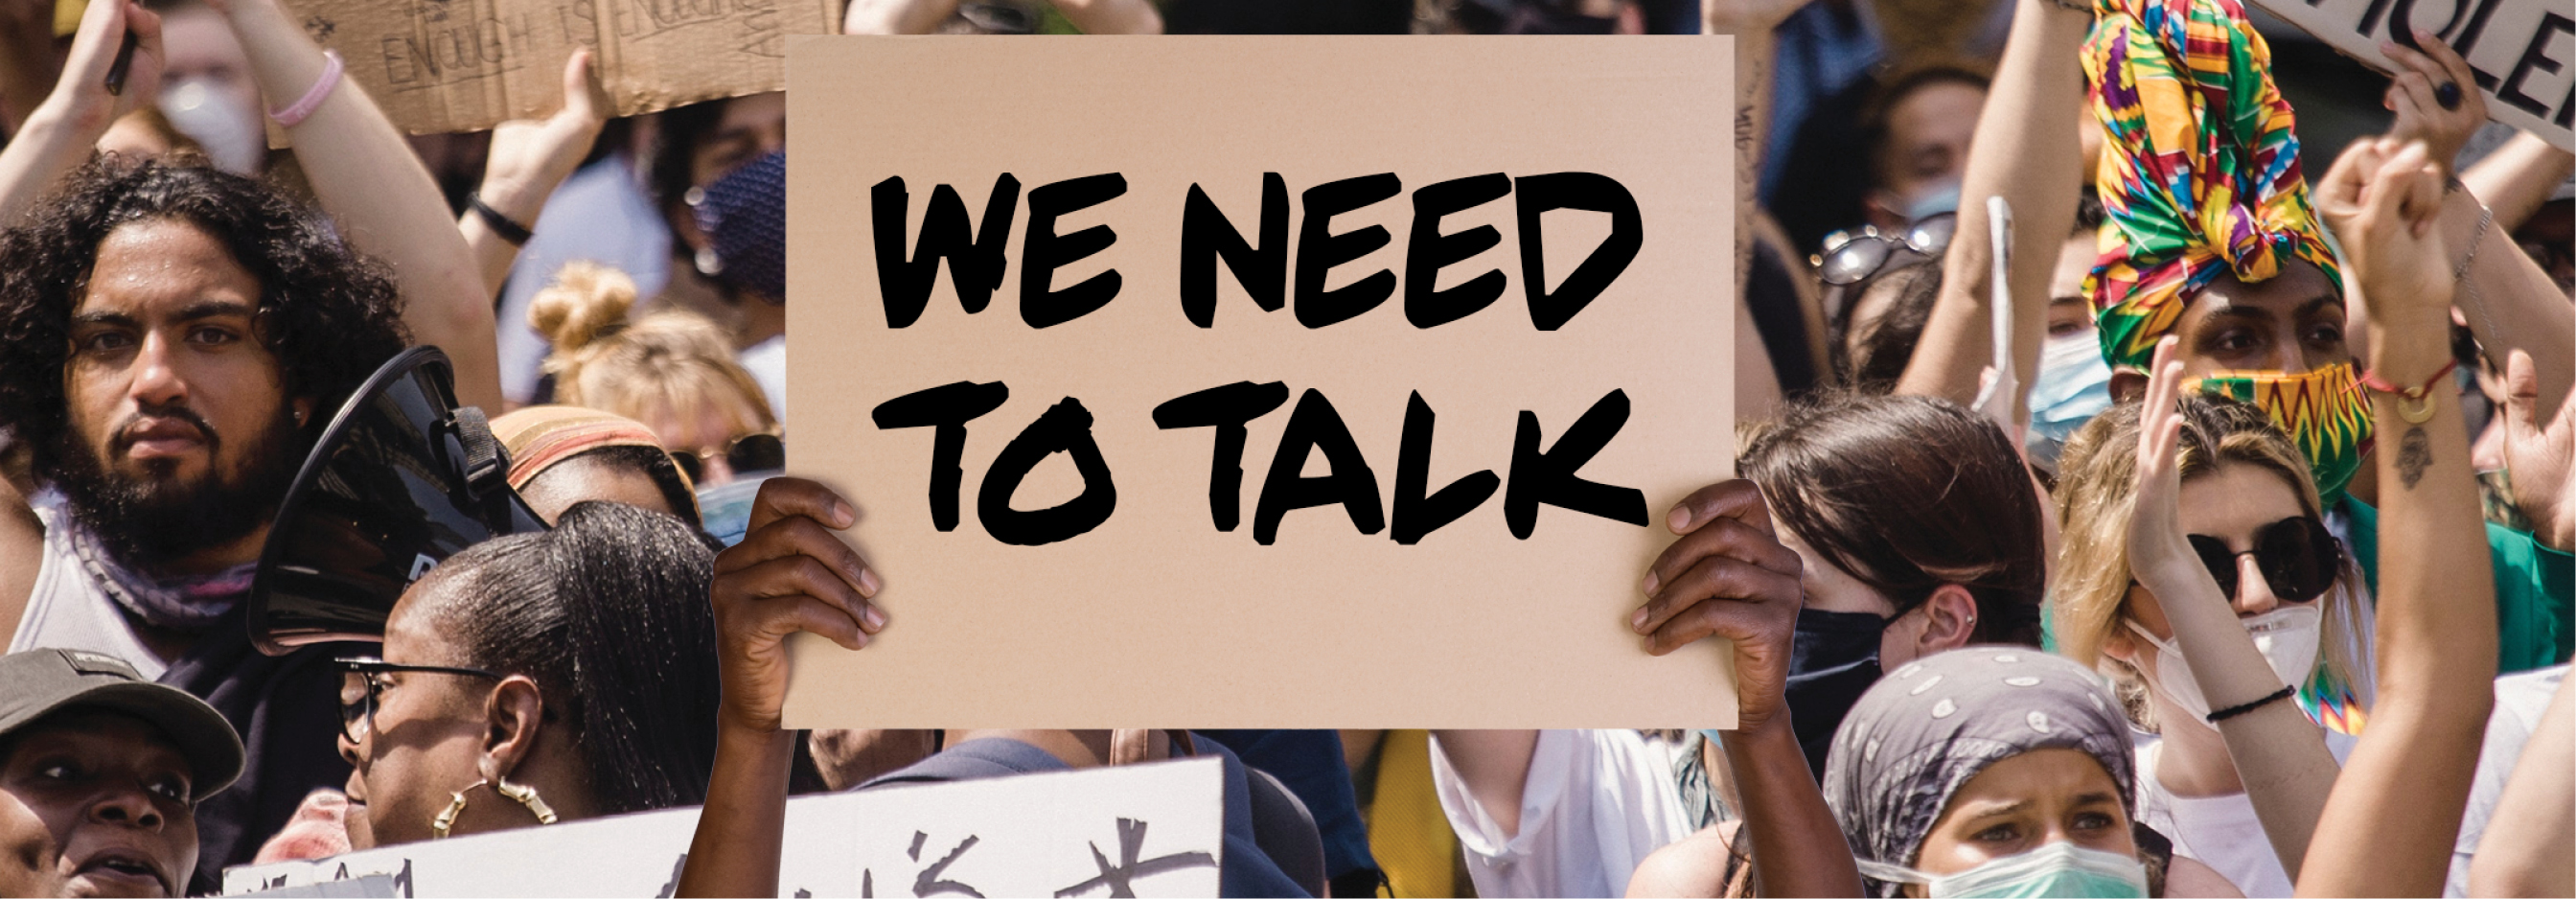 We Need To Talk: Conversations on Racism for a More Resilient Las Vegas, Episode 4: We Need To Talk About Economics